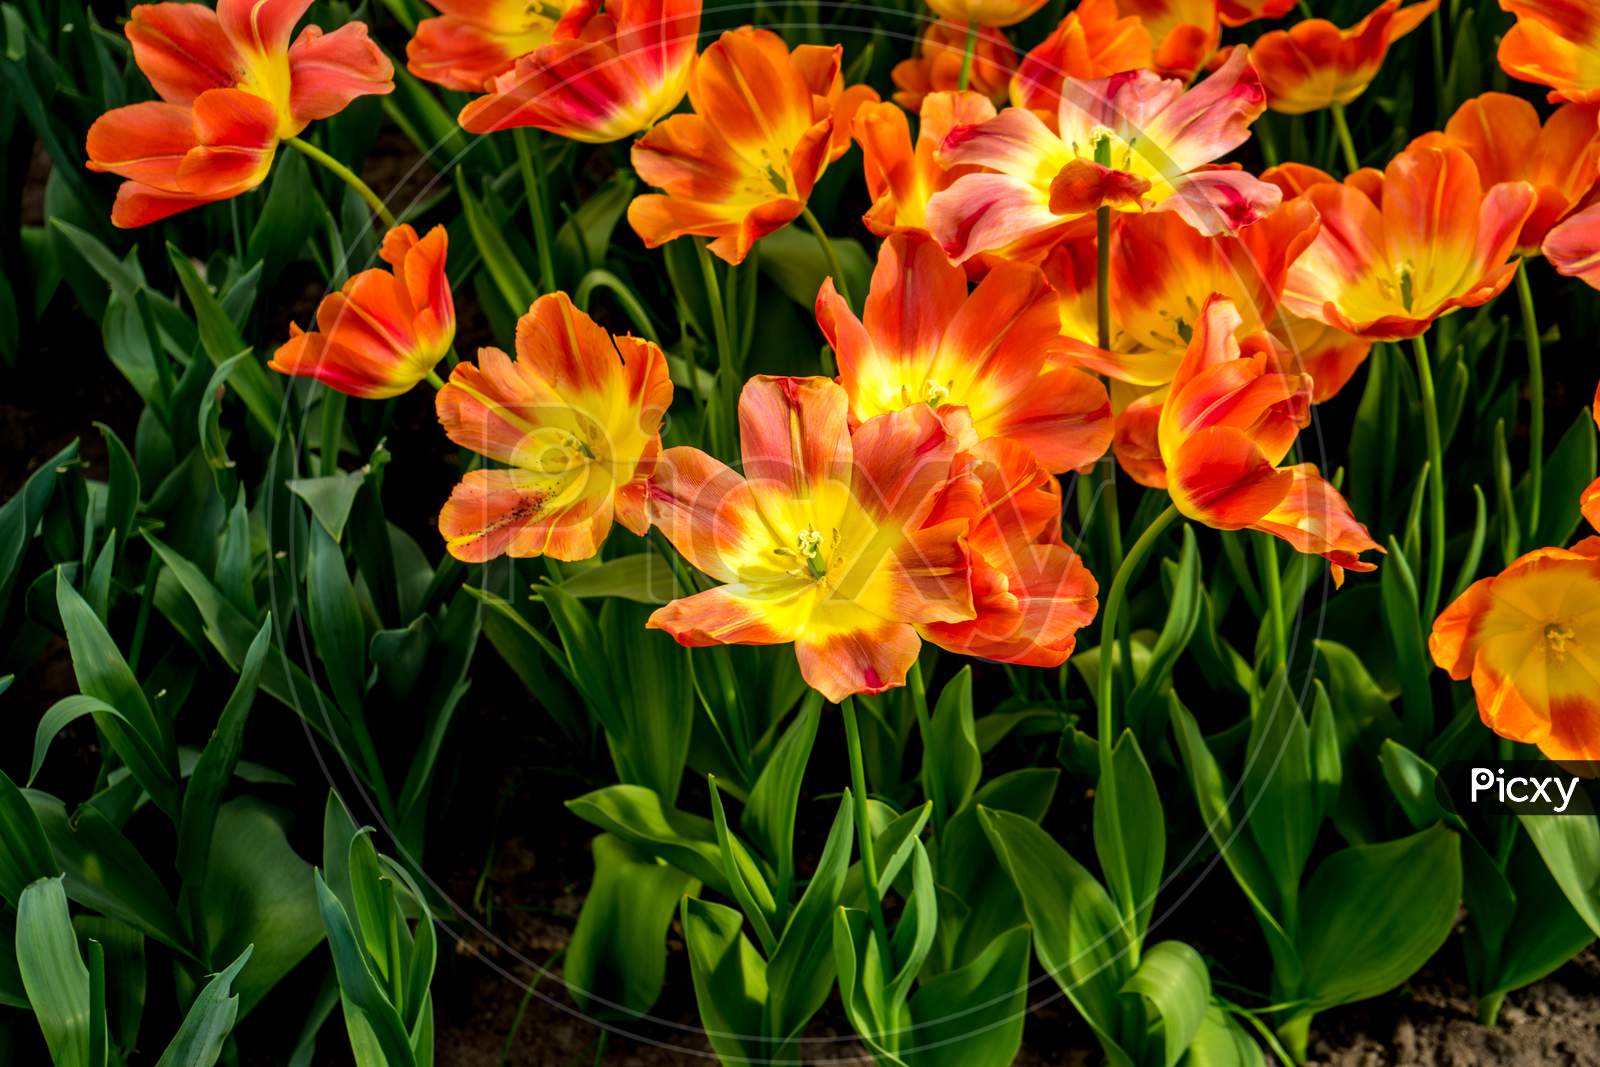 Red And Yellow Tulip Flowers In A Garden In Lisse, Netherlands, Europe